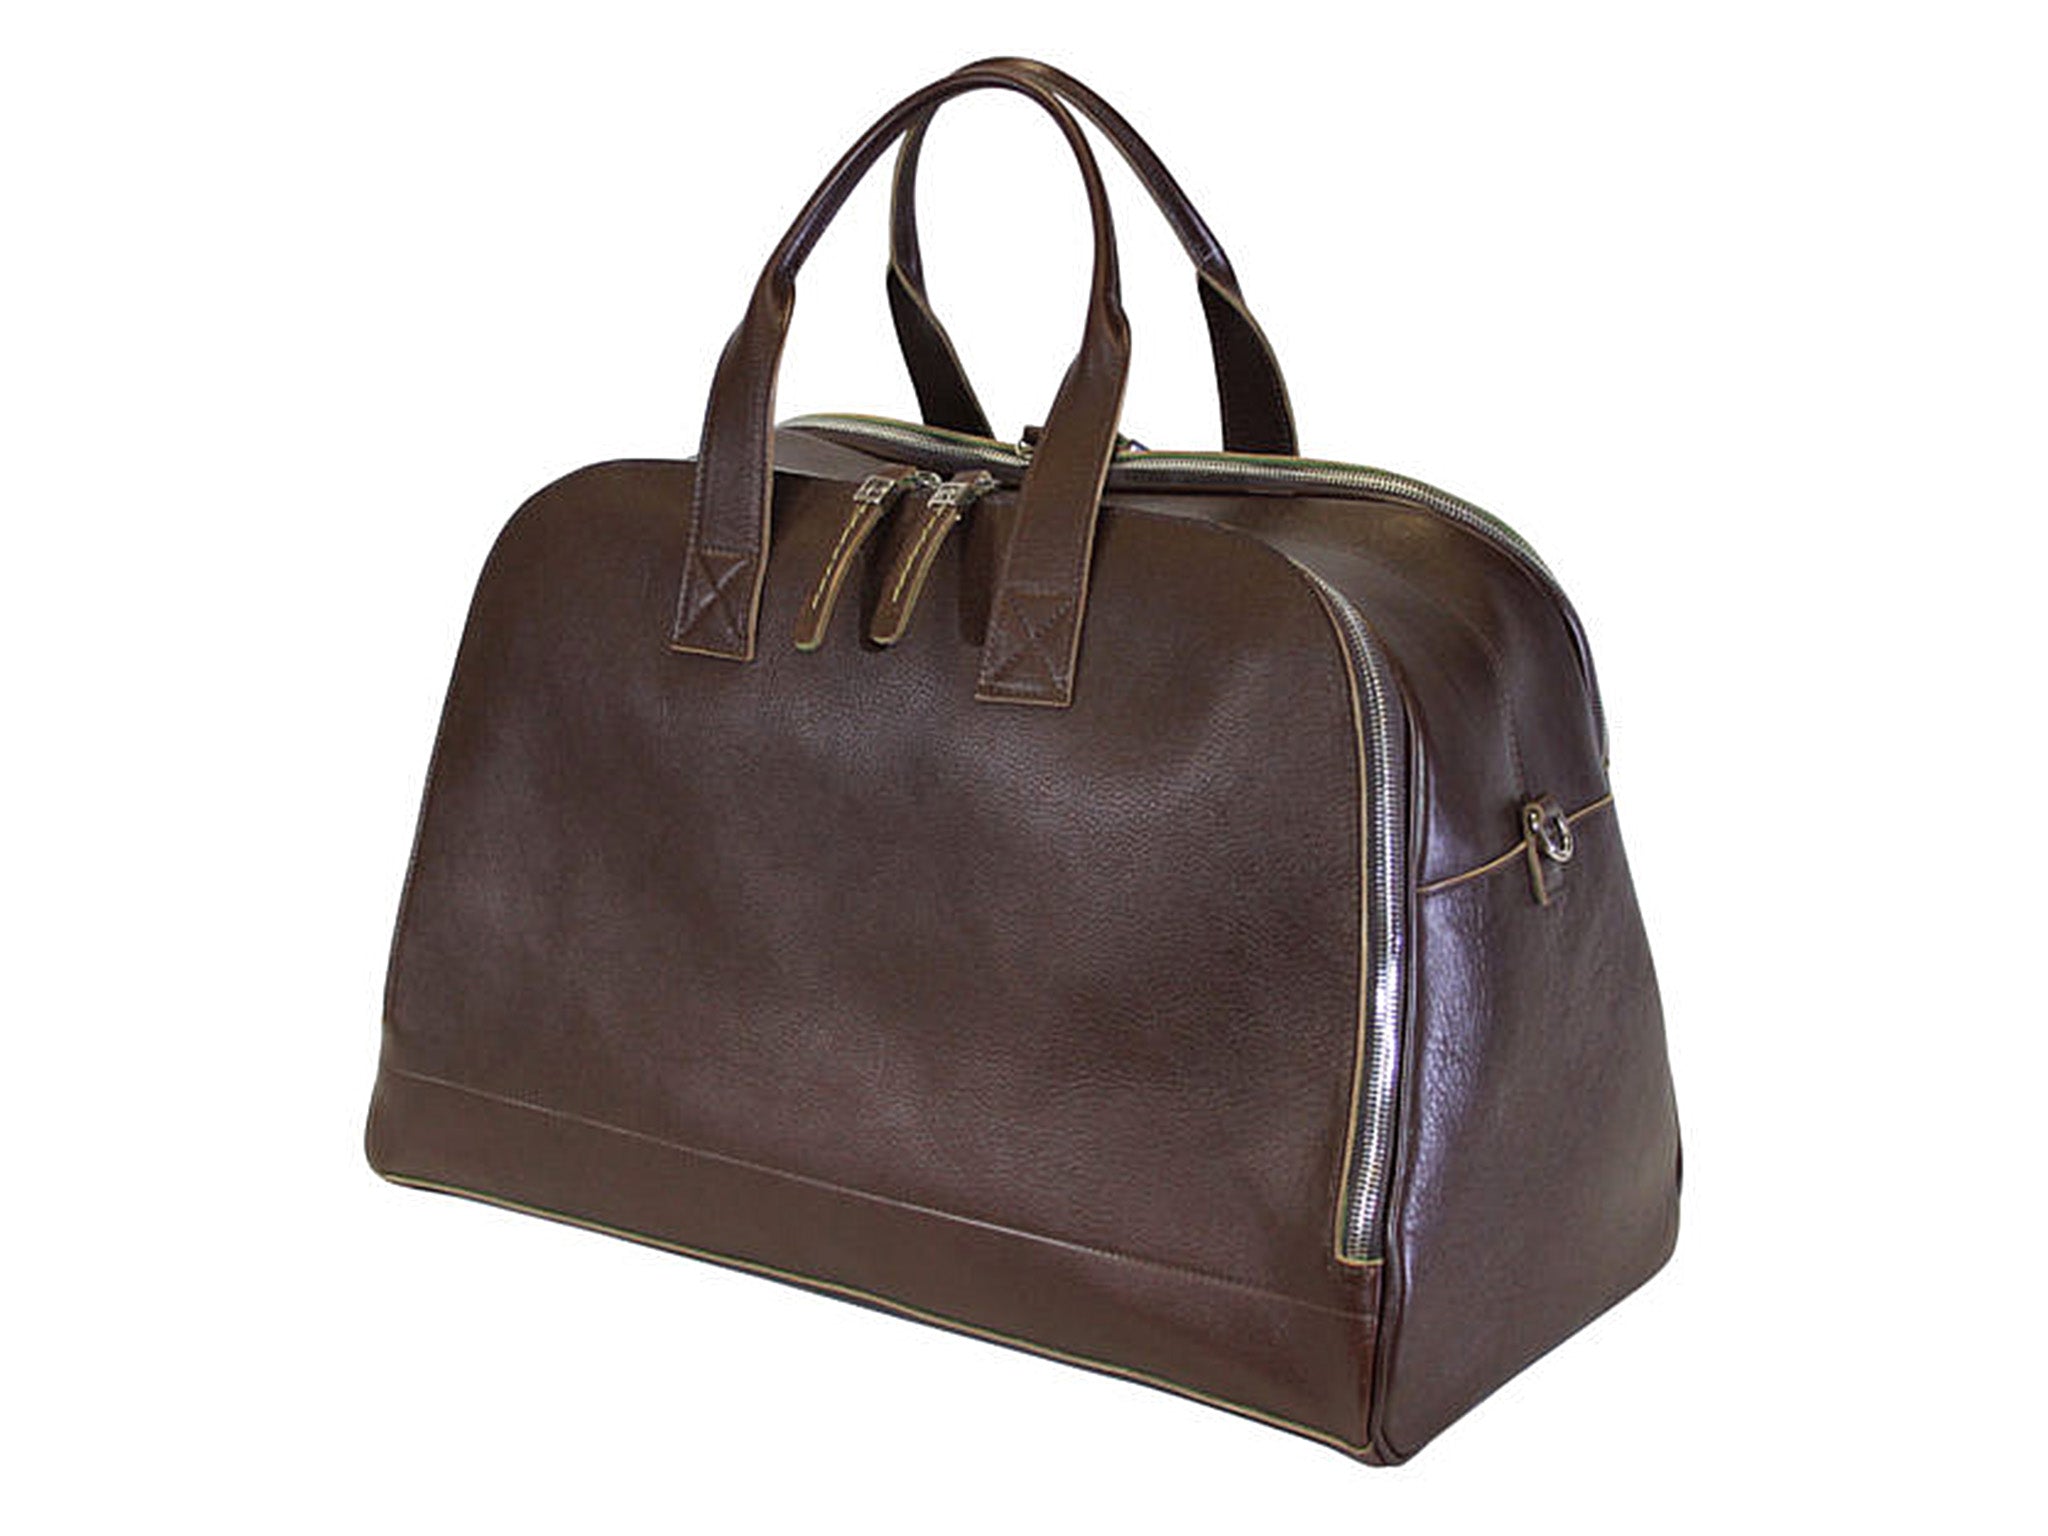 Marco Polo Luxury Travel Bag Brown